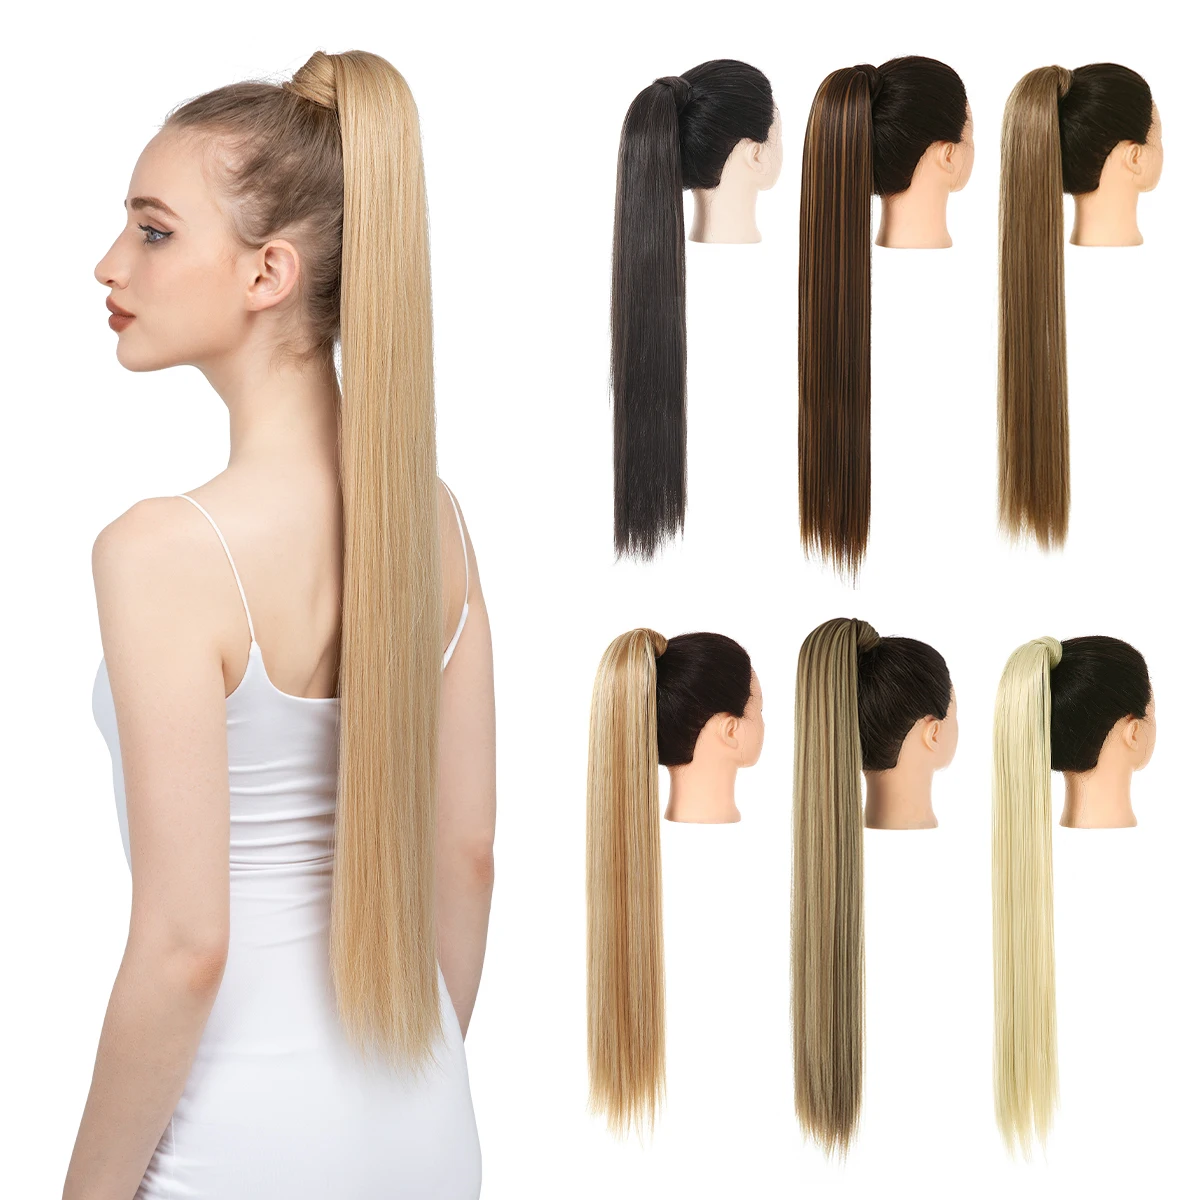 Hairpiece Ponytail Smooth Human Hair | Pigtail Natural Hair Extensions -  Synthetic - Aliexpress